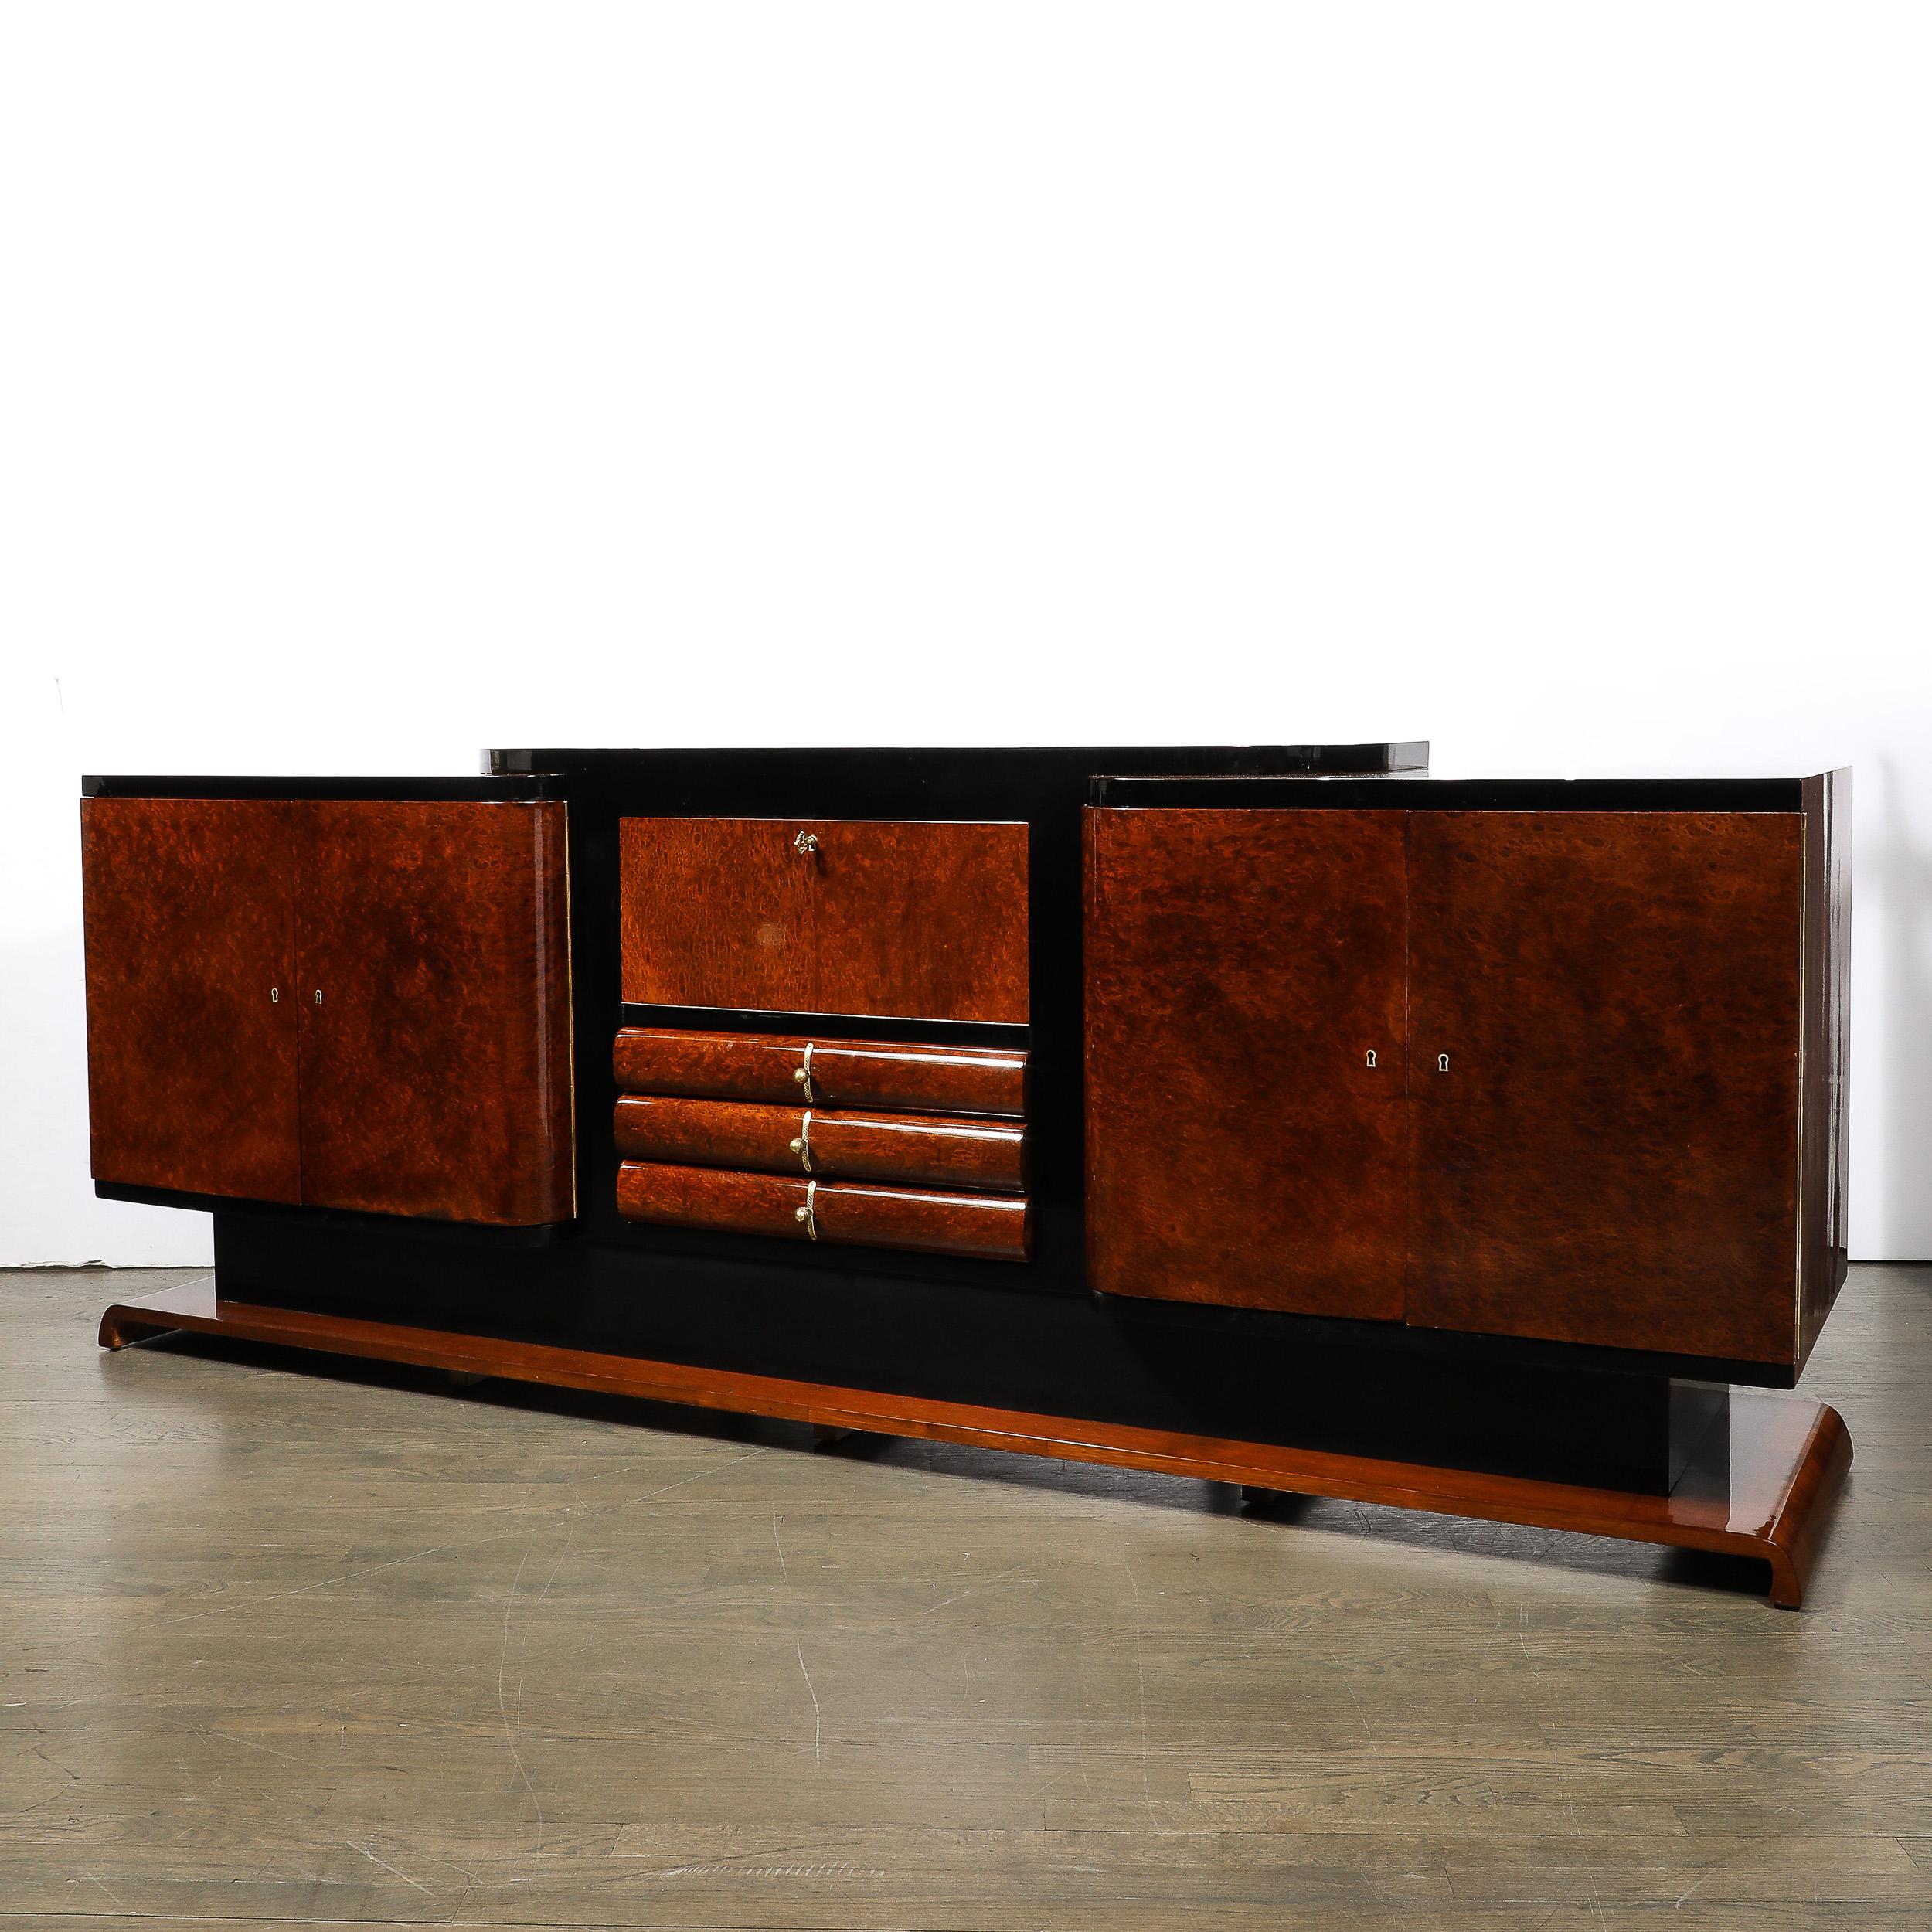 This remarkably beautiful Art Deco Sideboard in Bookmatched & Burled Amboyna Wood, Mahogany, & Walnut Base with Black Lacquer Detailing & Brass Fittings originates from France, Circa 1925. A monumental and stunningly made case piece, this sideboard